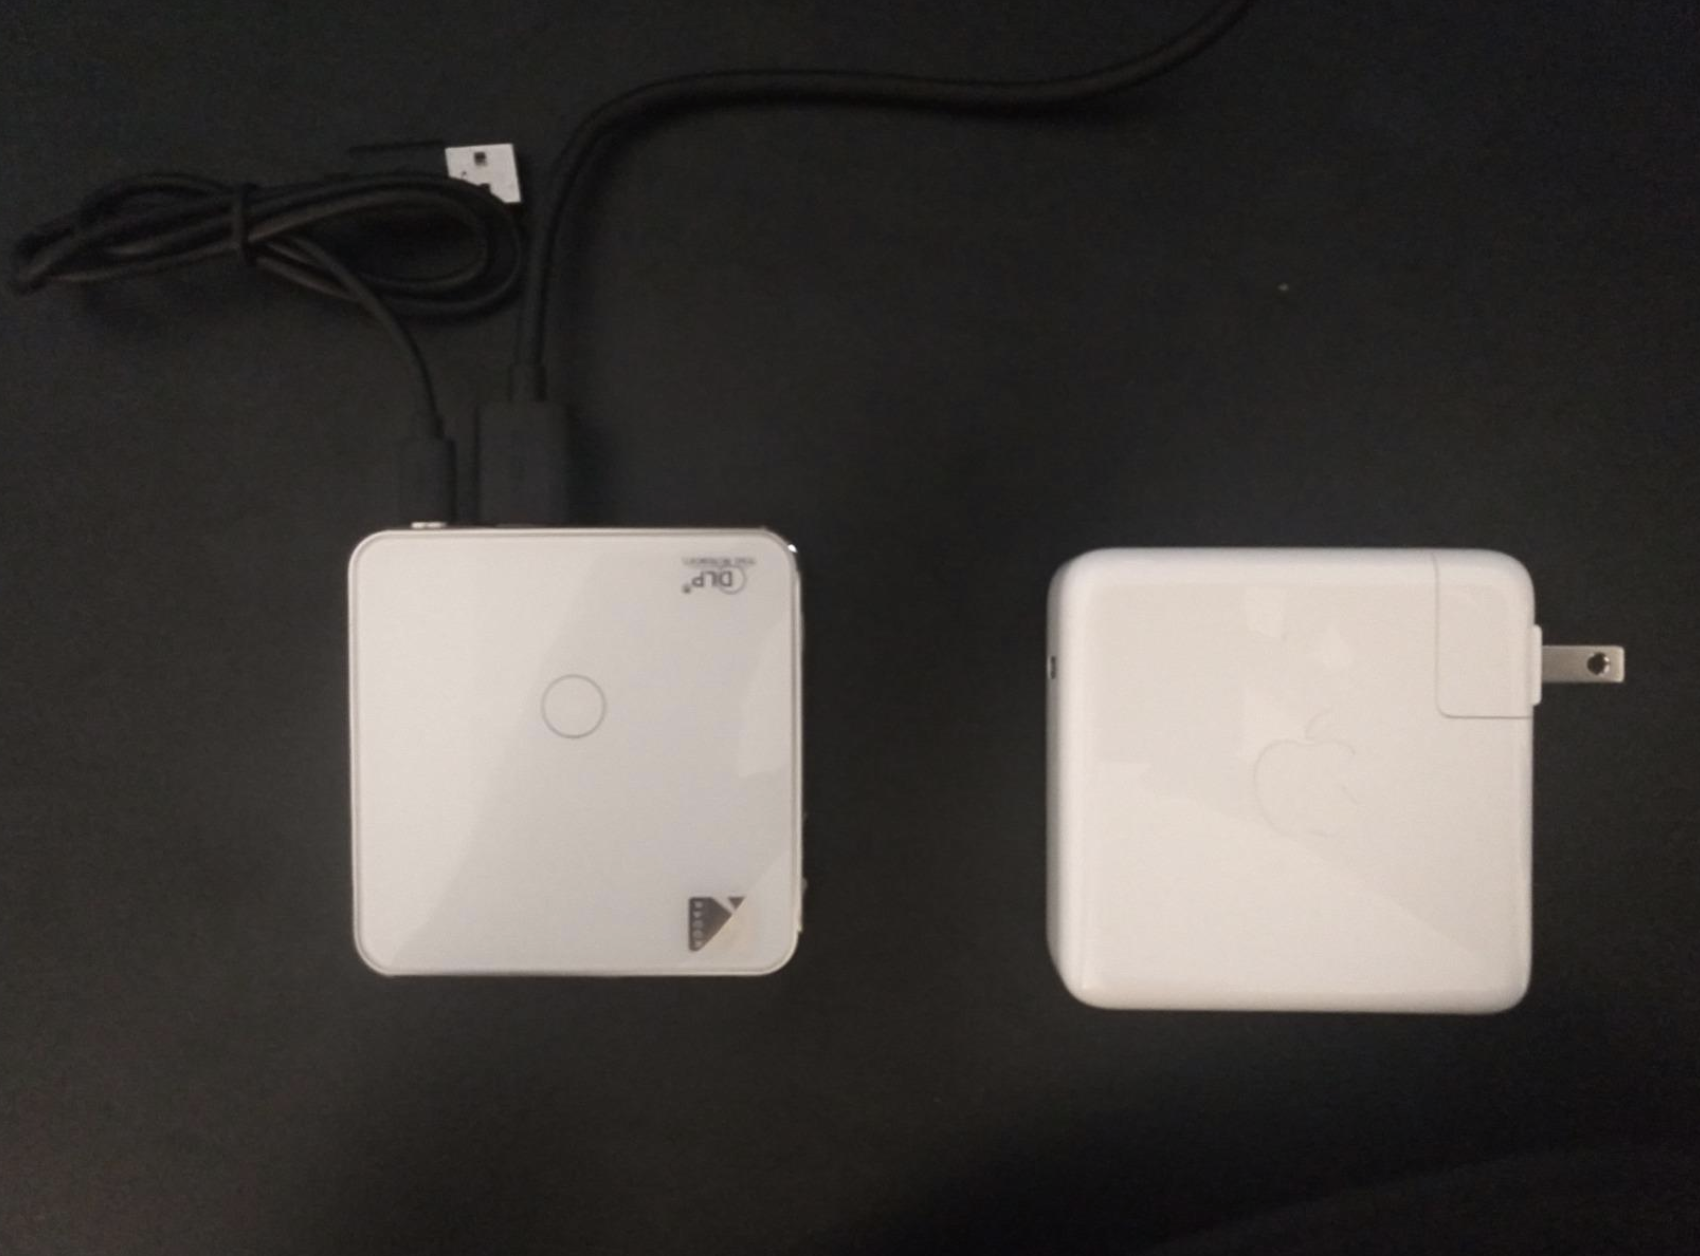 The projector laying on a surface beside a square Macbook charger which is pretty much the same width — no bigger than an average-size coaster